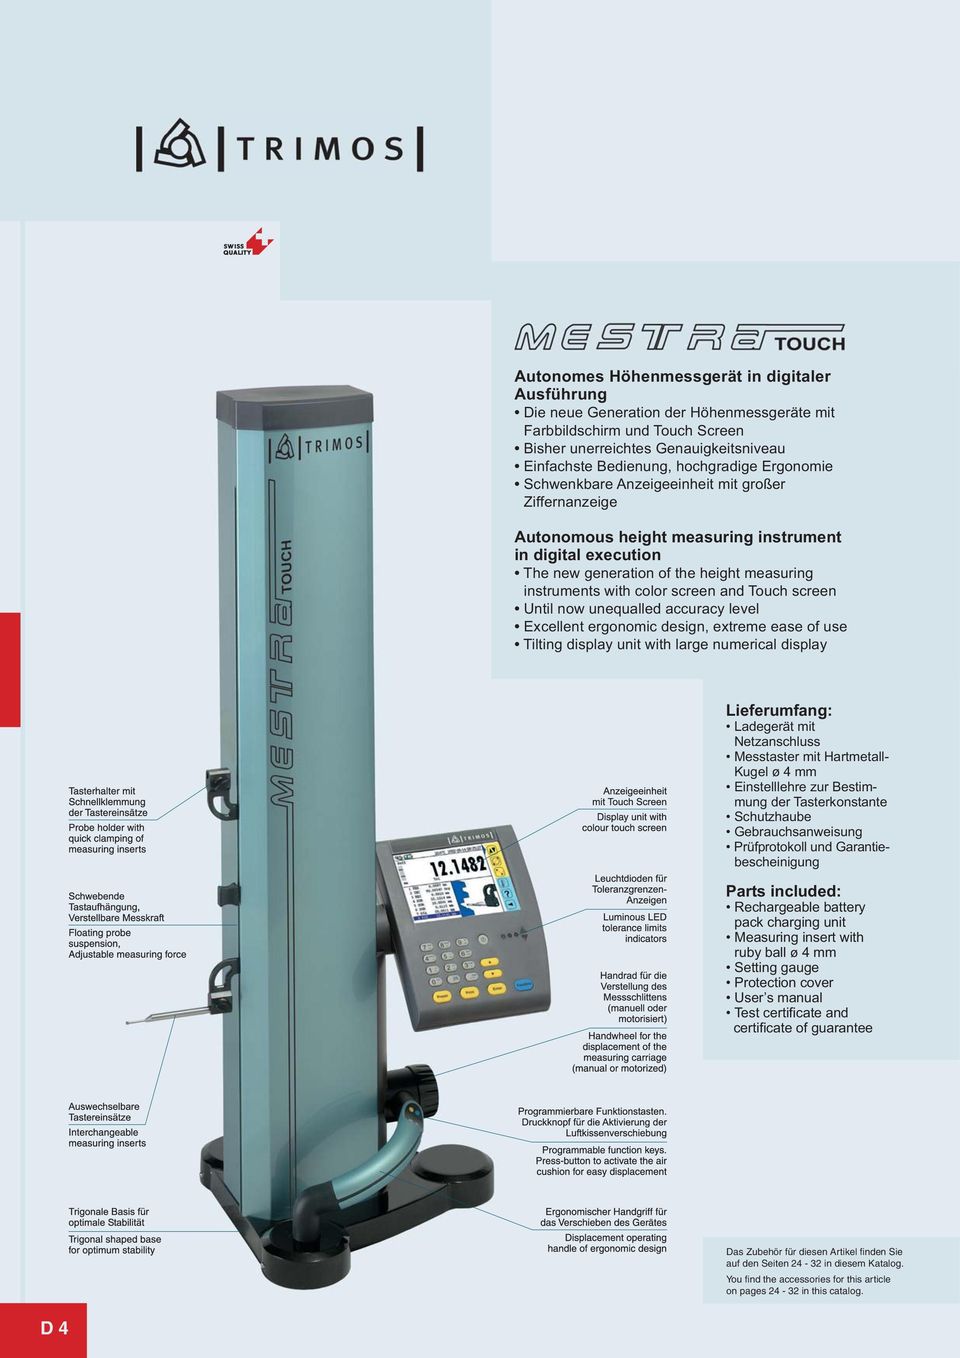 Touch screen Until now unequalled accuracy level Excellent ergonomic design, extreme ease of use Tilting display unit with large numerical display Lieferumfang: Ladegerät mit Netzanschluss Messtaster